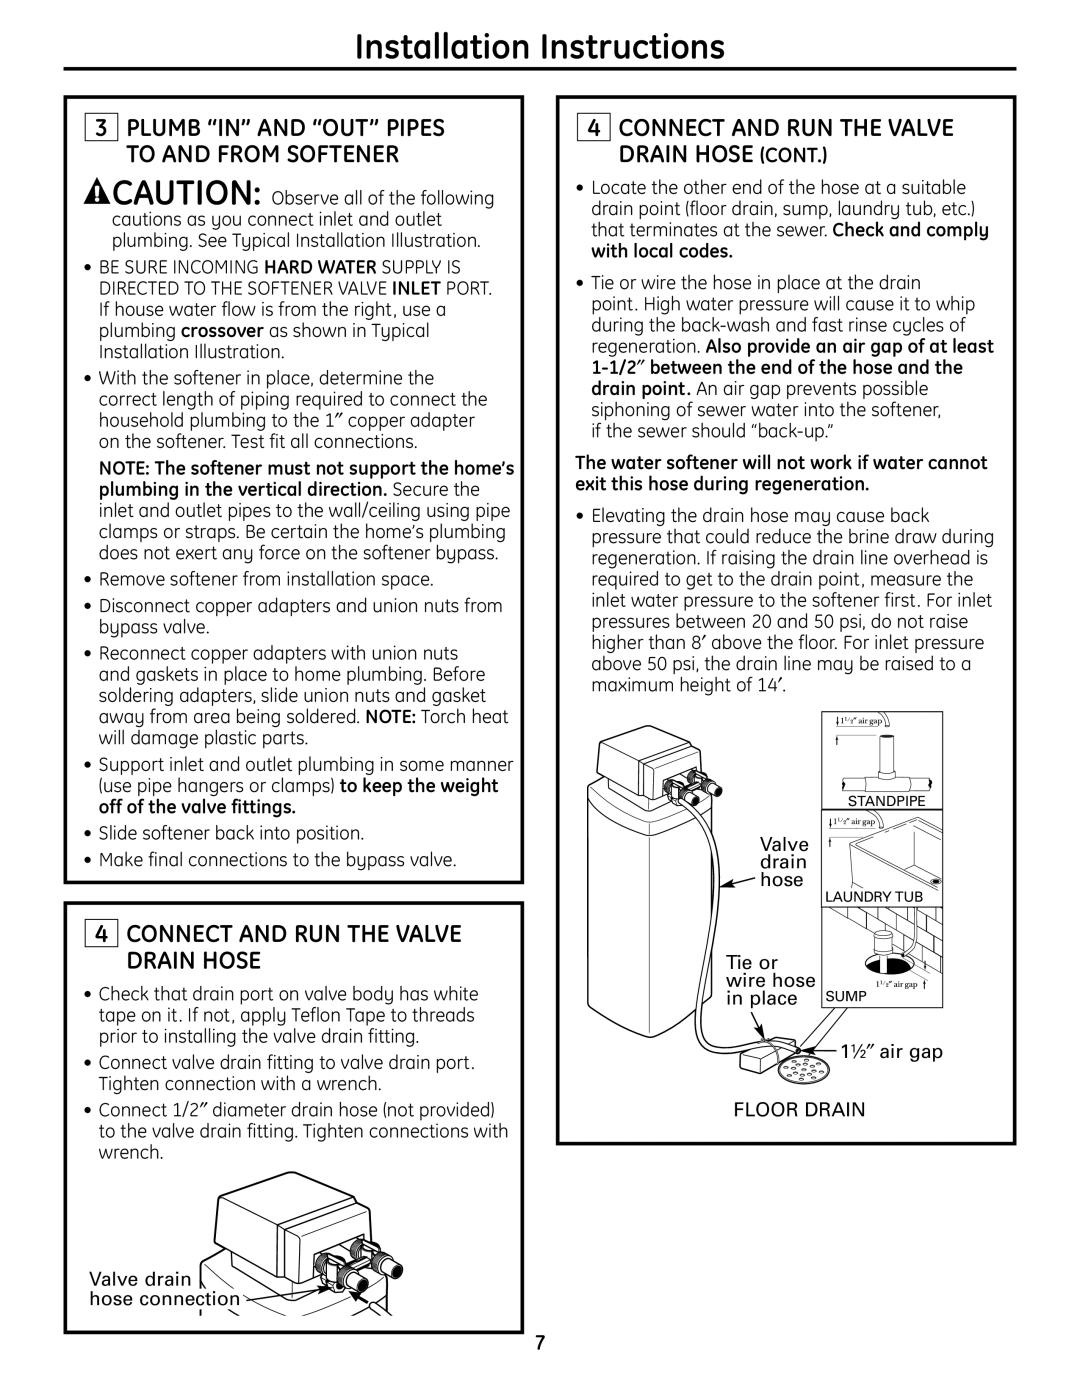 GE GNPR40L, GNPR48L Connect And Run The Valve Drain Hose Cont, Installation Instructions, off of the valve fittings 